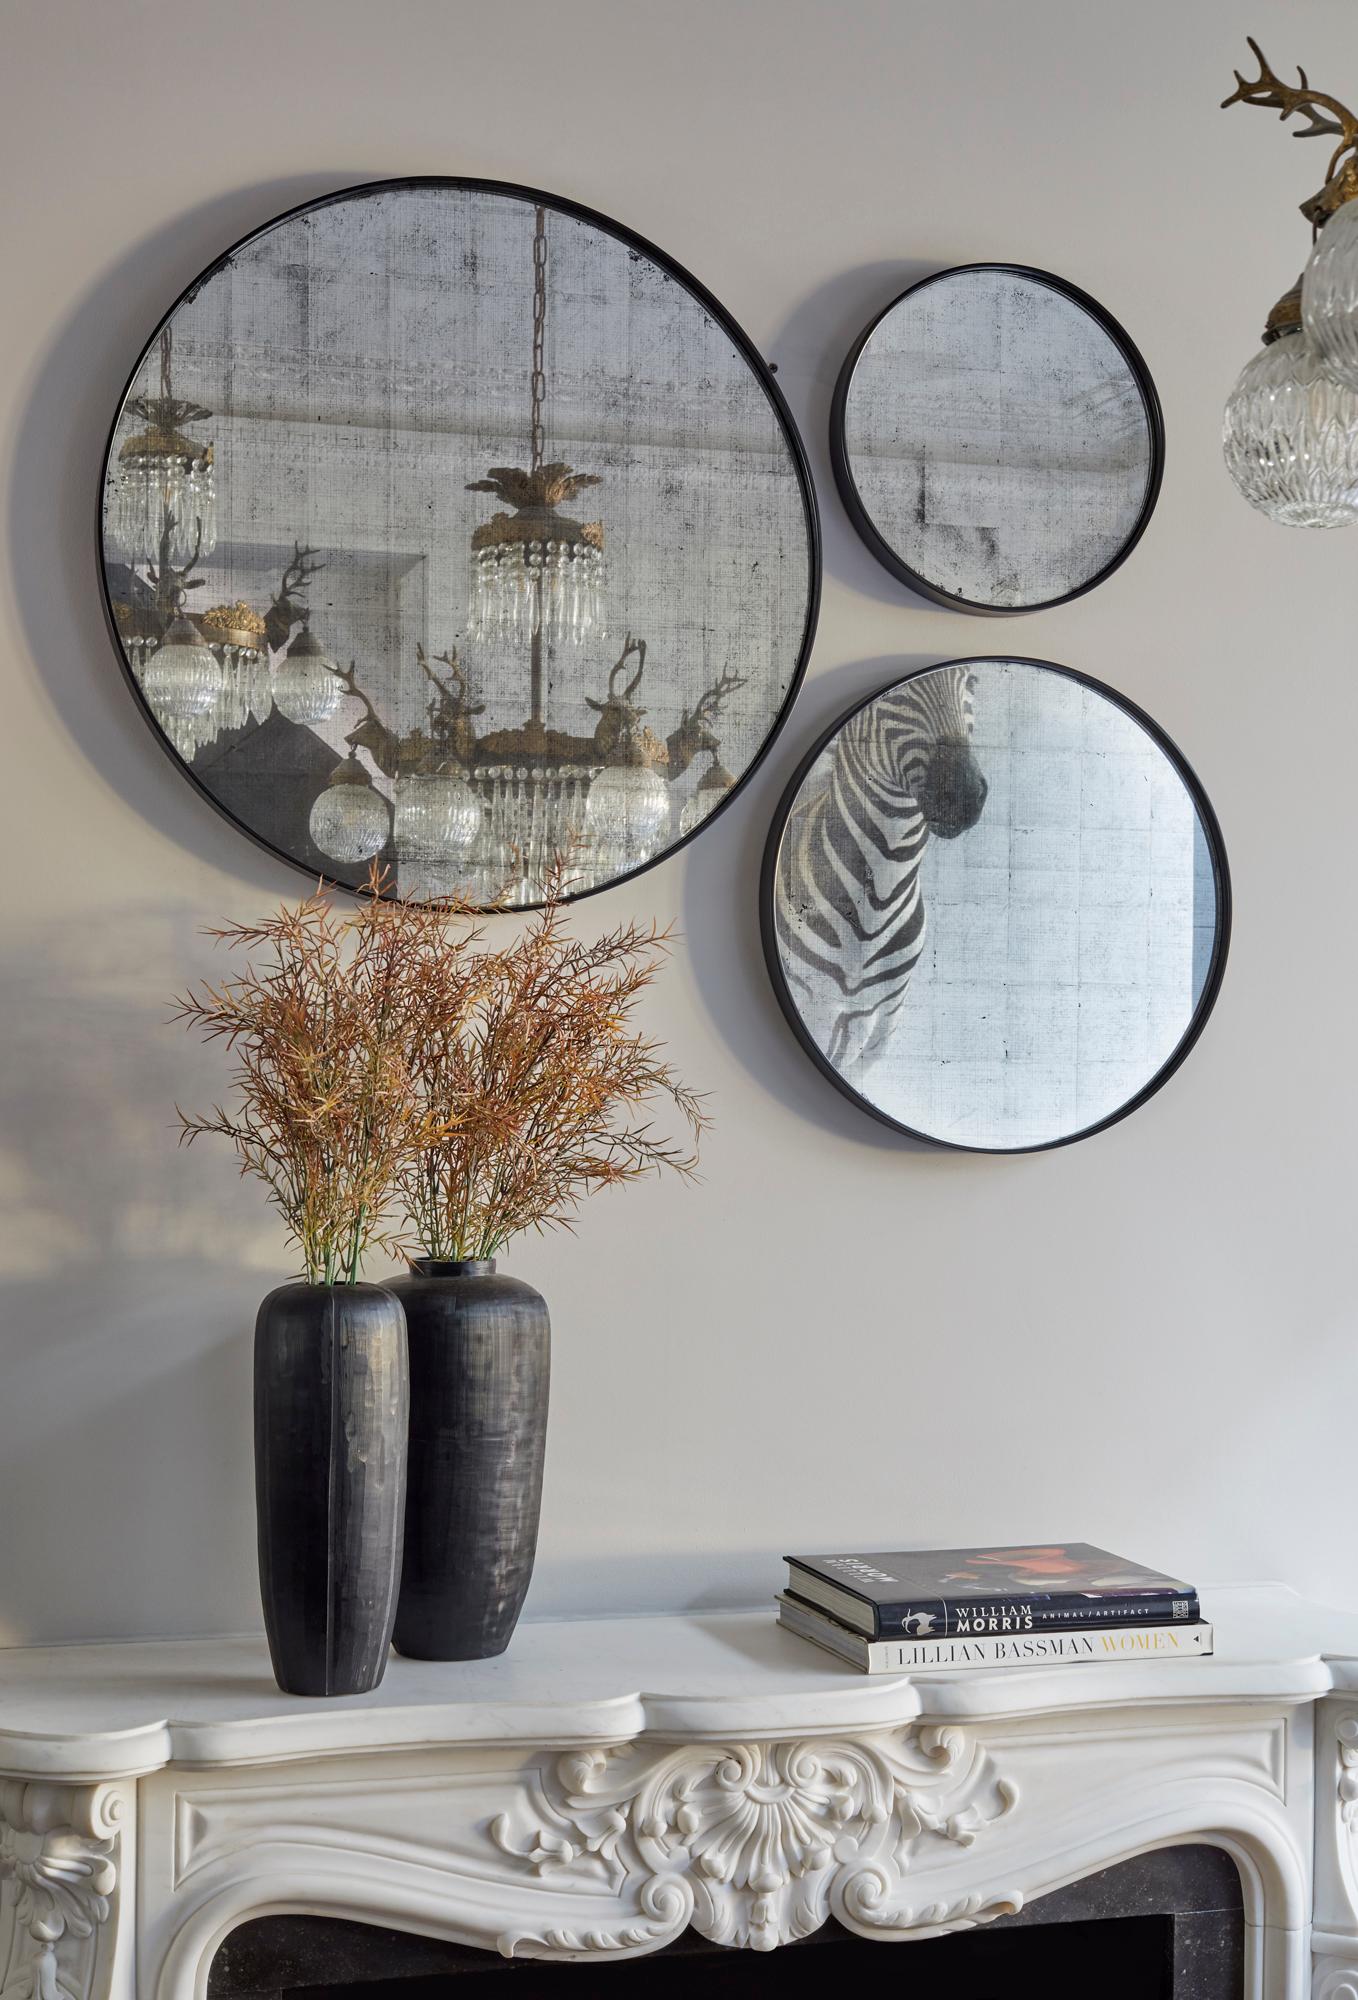 We adore the concept of multiples, and the Eros Collection's trio of Verre Èglomise mirrors are a chic, effortless statement. Eros, the Greek god of sexual appeal and Cupid's Roman counterpart, inspired this series of white mirrors, which will